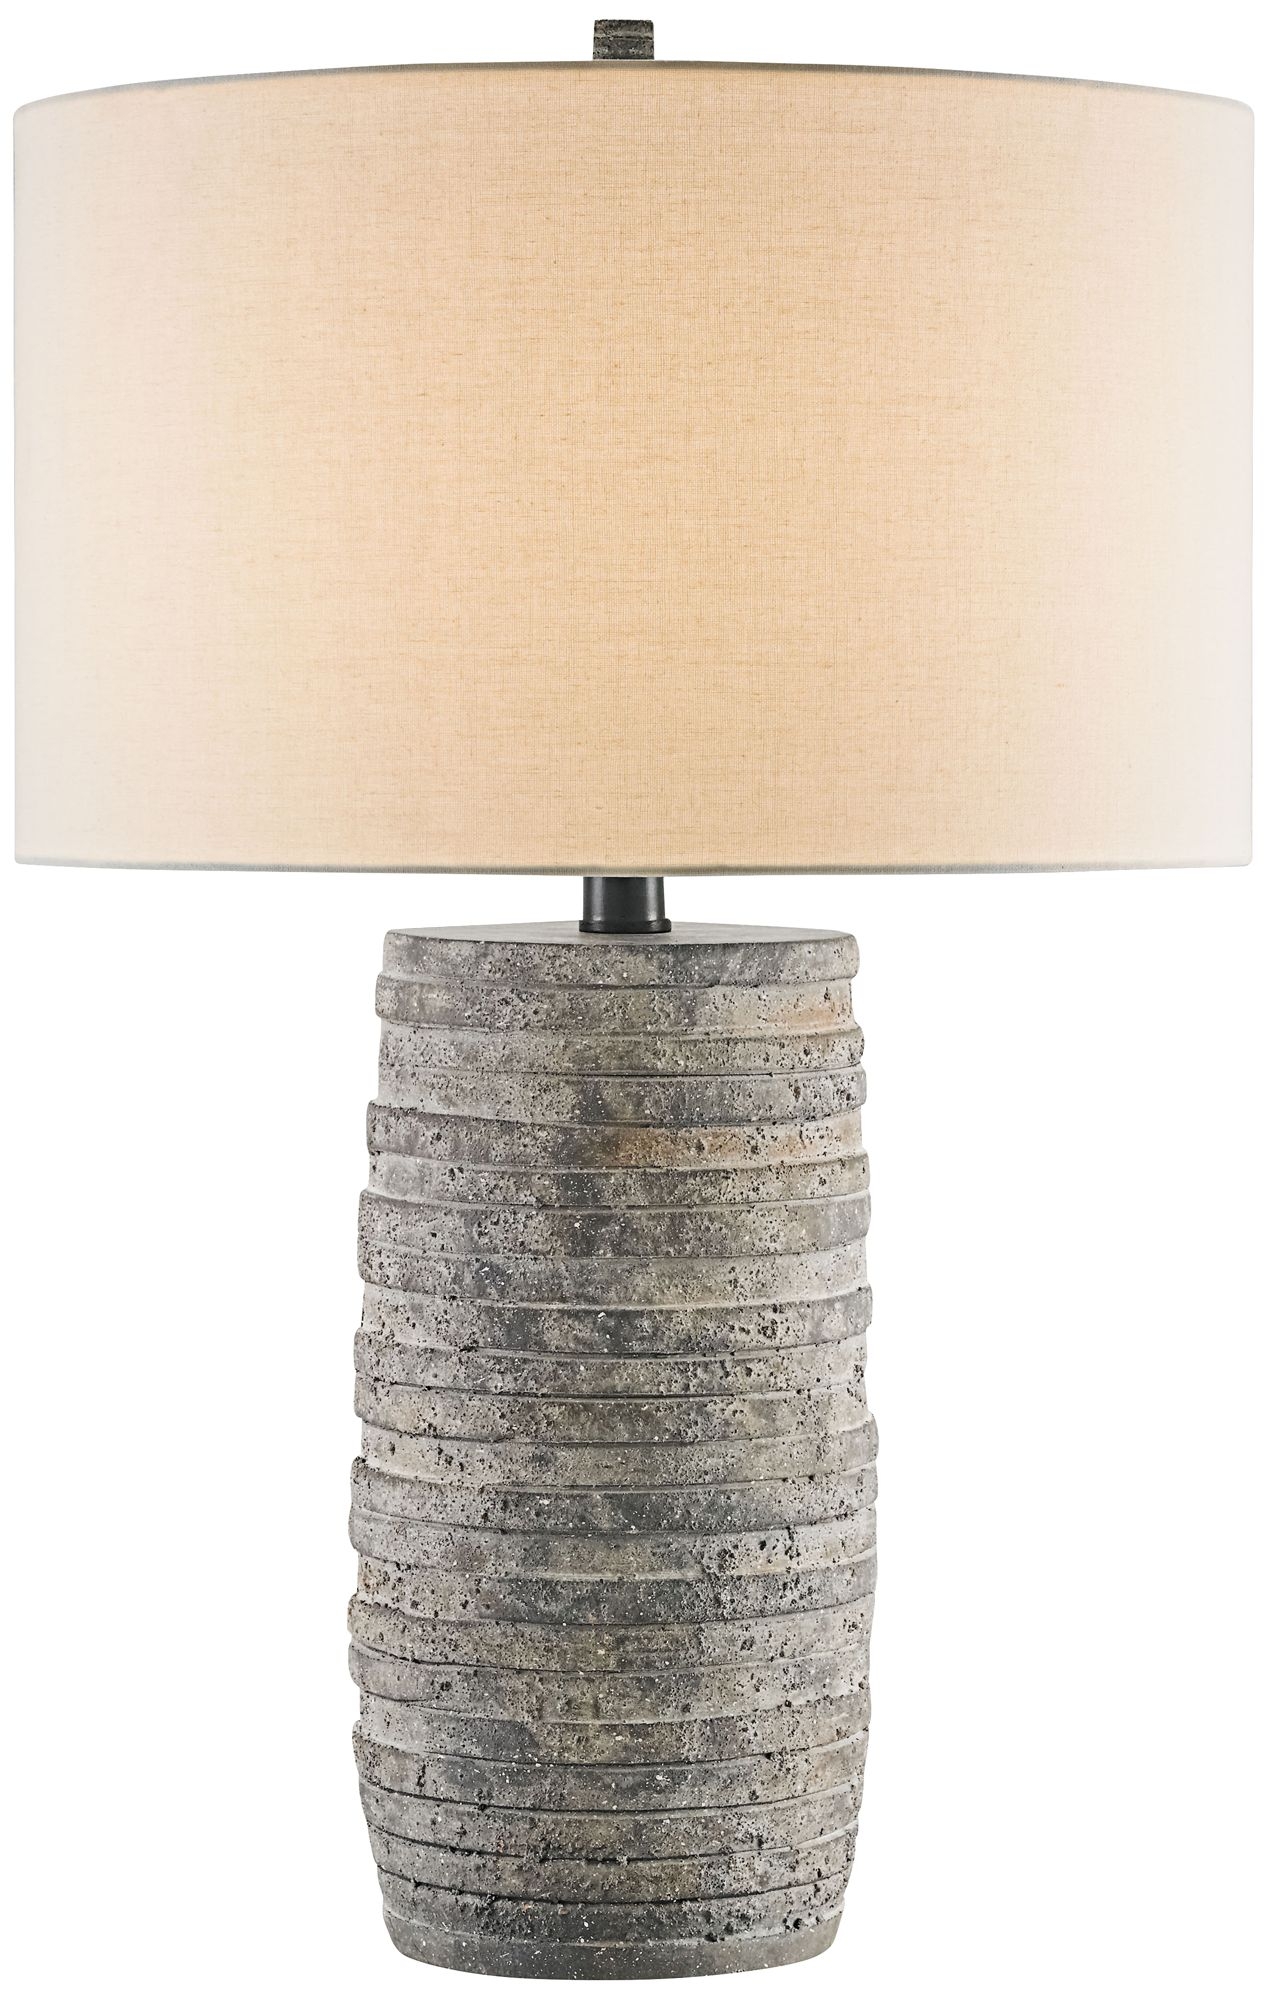 Currey and Company Innkeeper Rustic Terracotta Table Lamp - Image 0